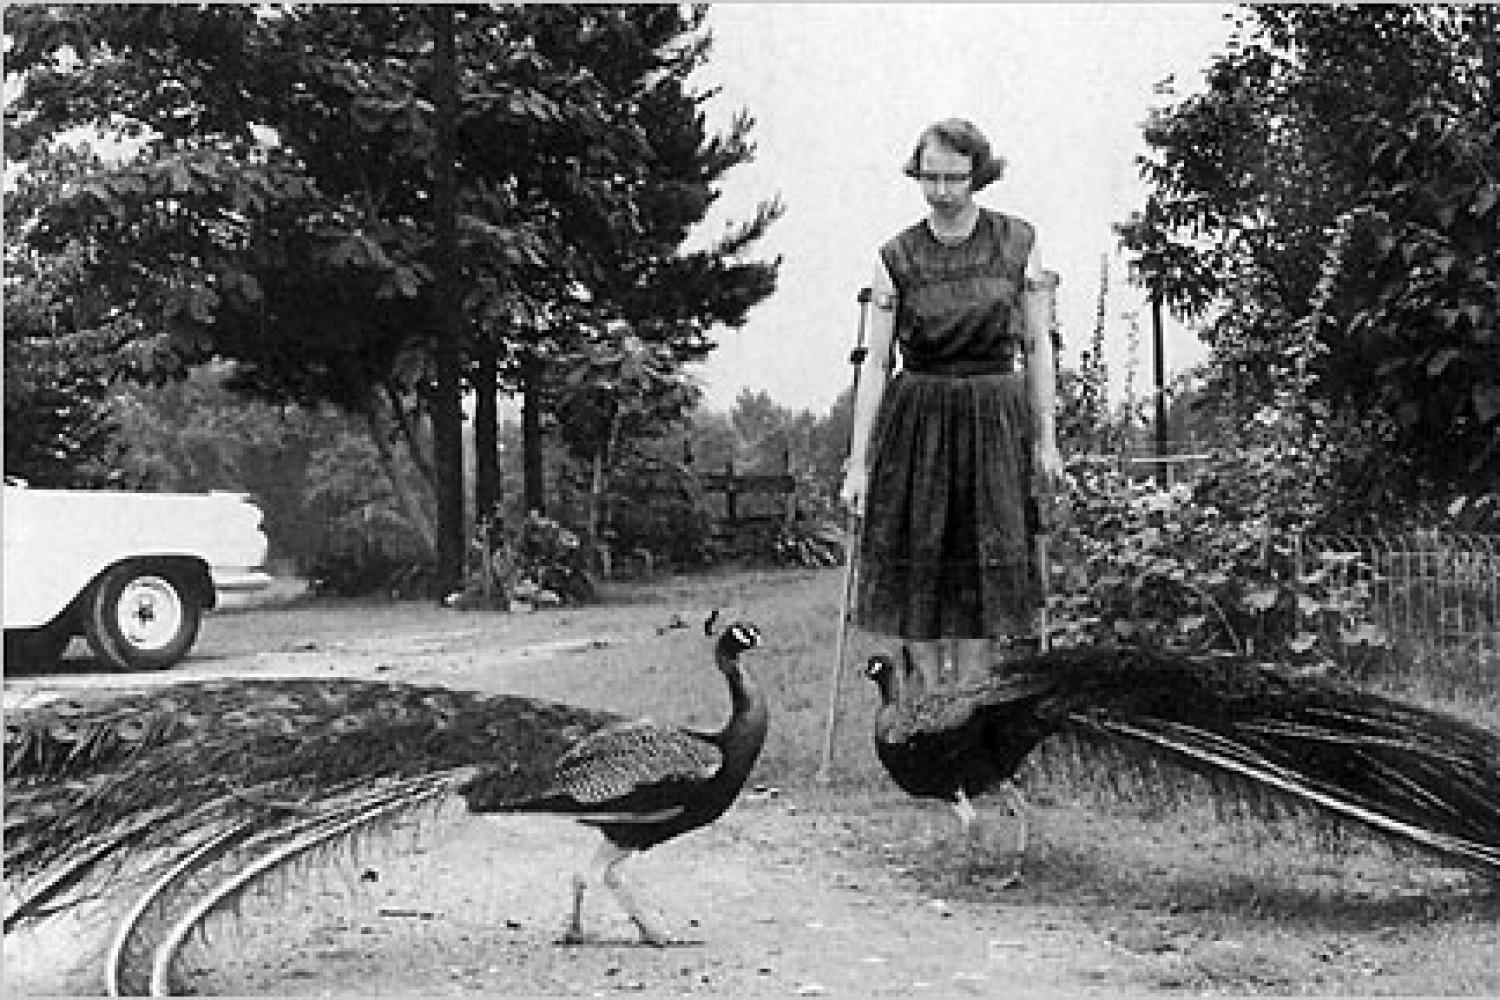 Flannery O'Connor with her peacocks at Andalusia